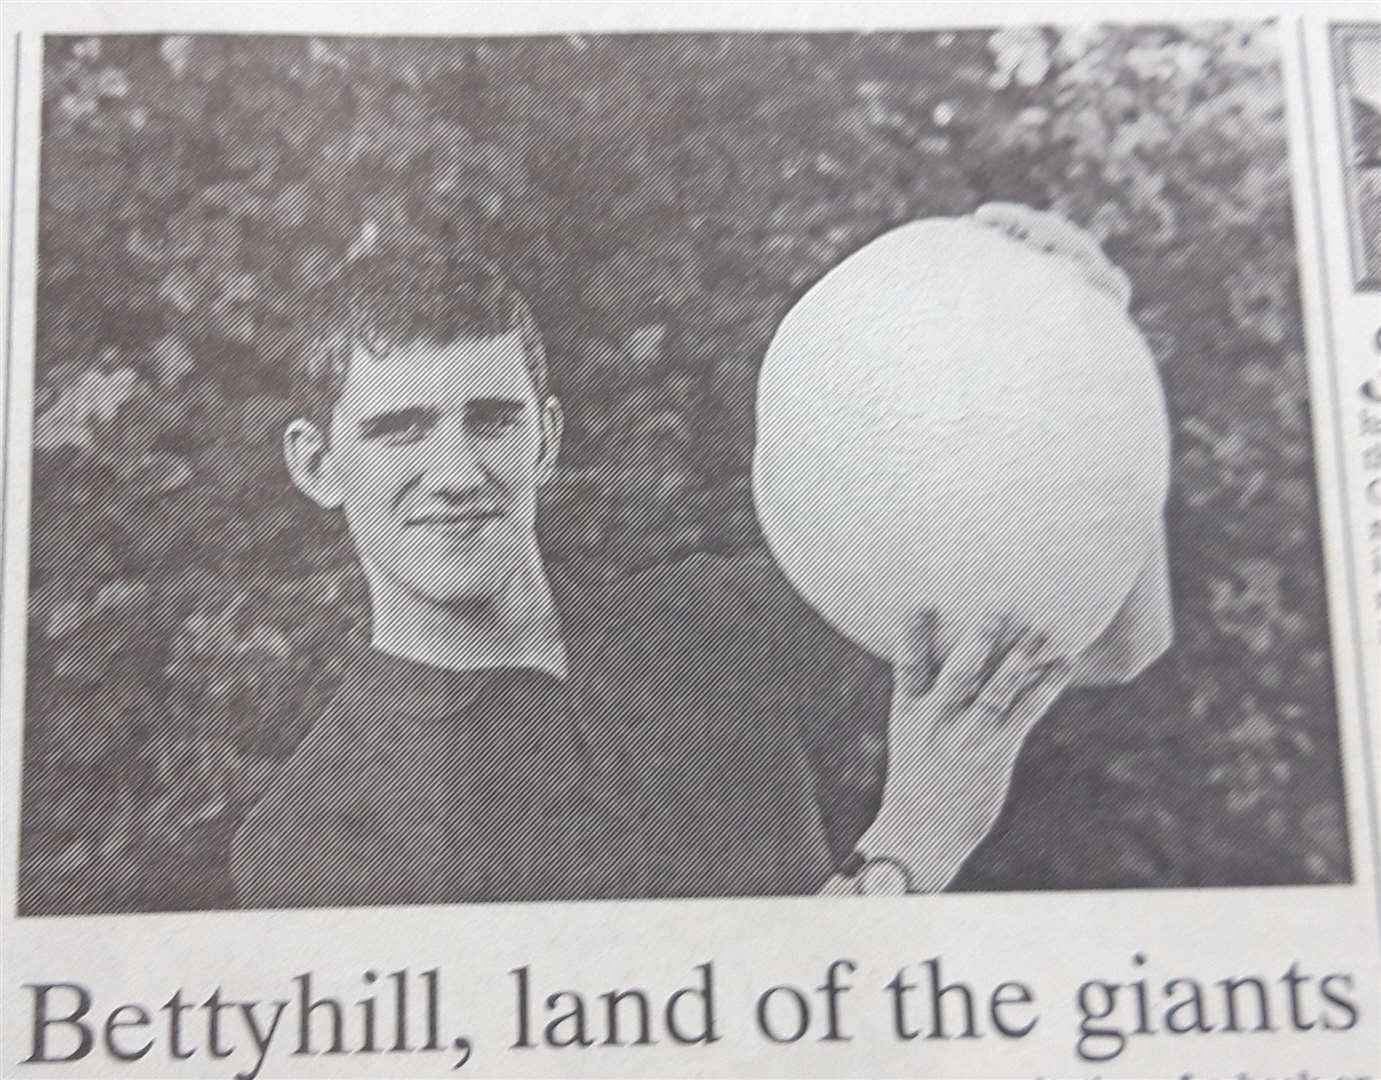 The giant puffball found in the Bettyhill area. See extract from the newspaper of August 21, 1998.